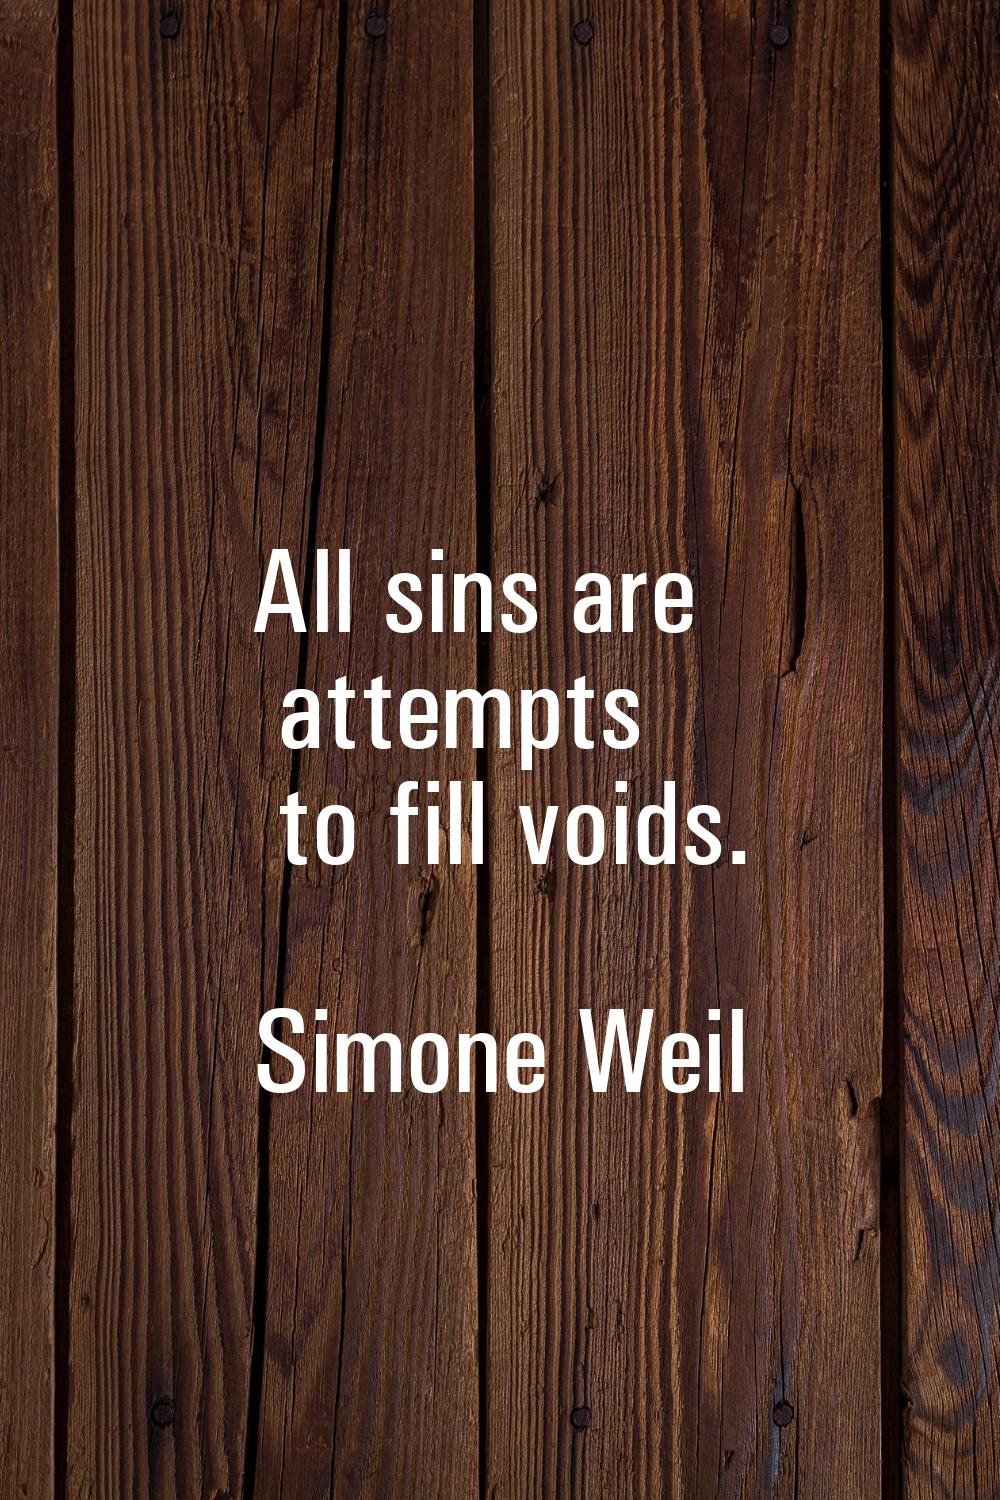 All sins are attempts to fill voids.